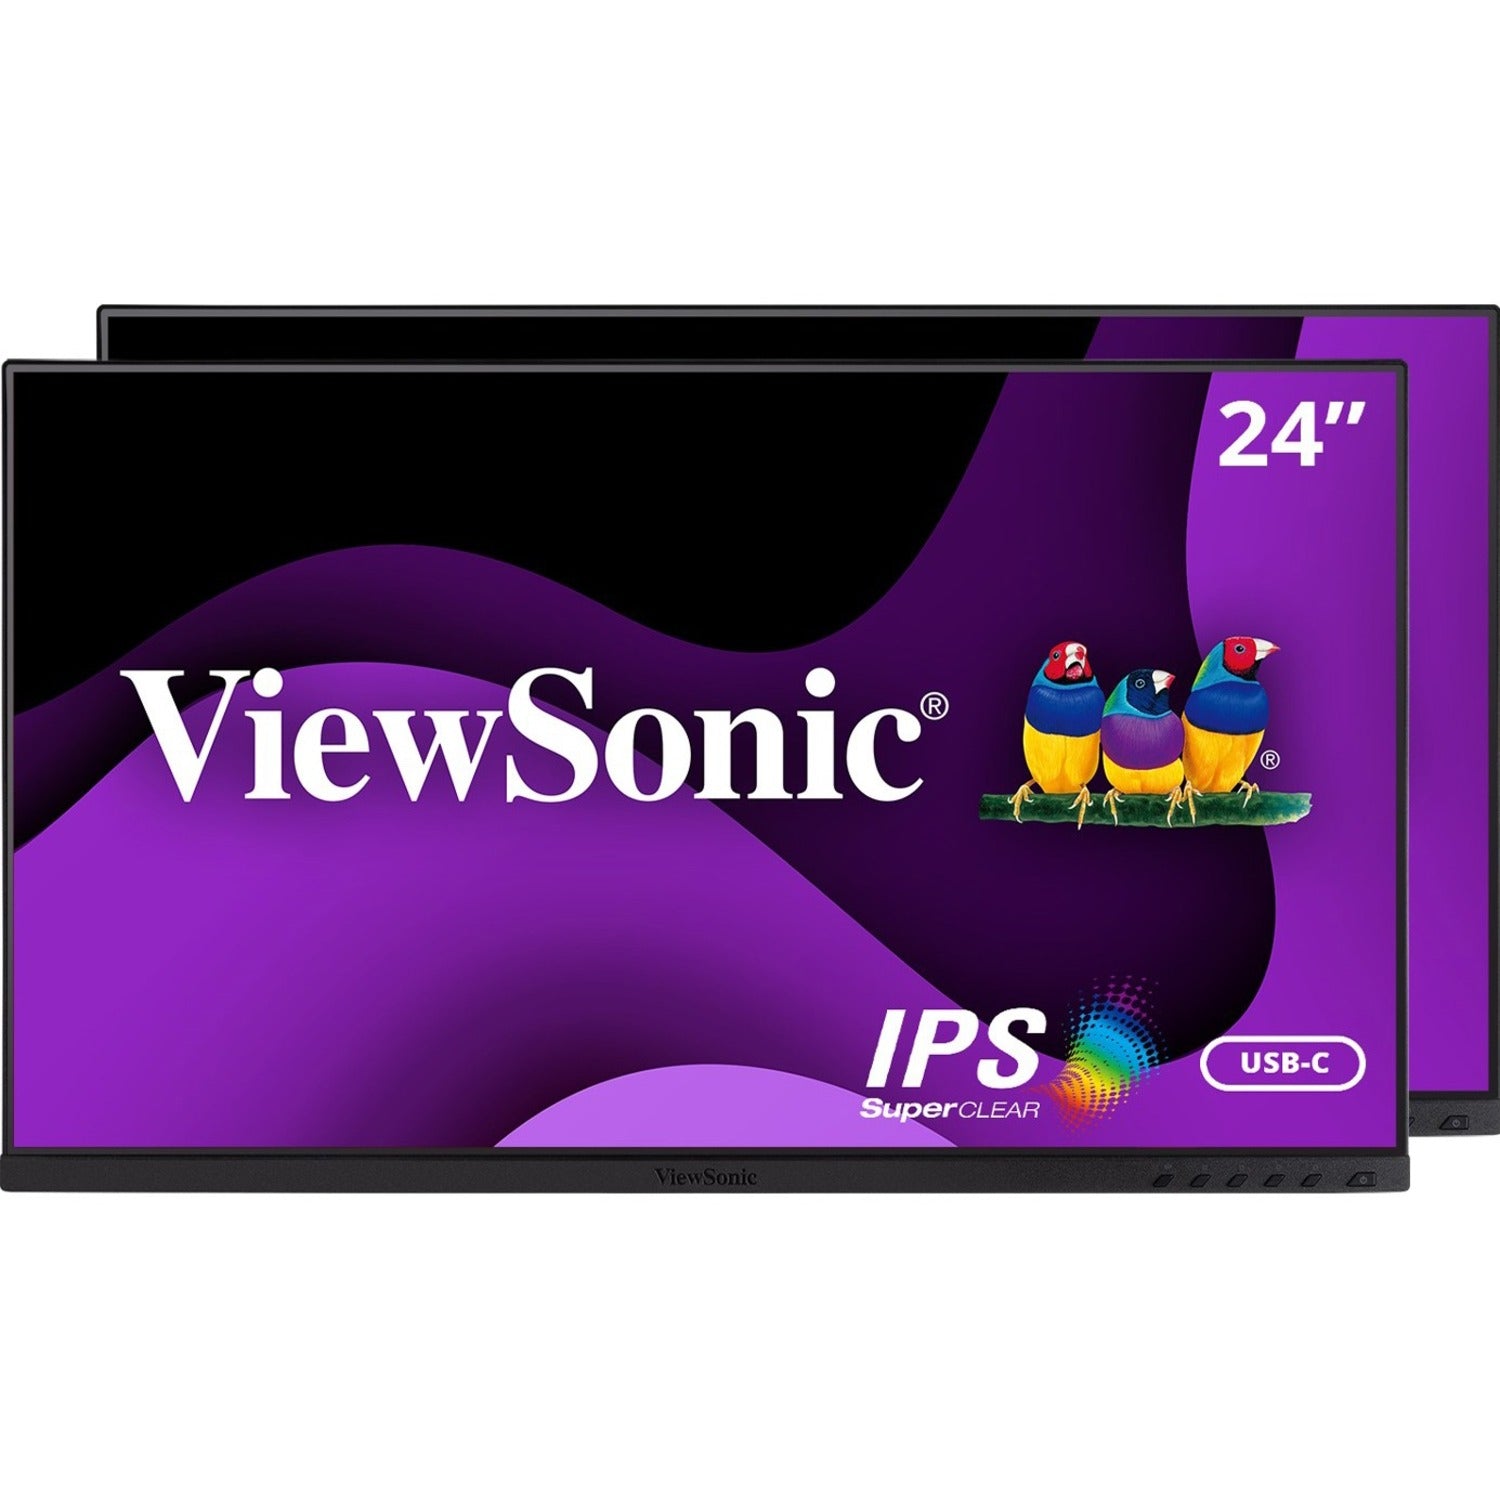 ViewSonic VG2455_56A_H2 24 Inch Dual Pack Head-Only 1080p IPS Monitors with USB C 3.2 with 90W Power Delivery, Docking Built-In, HDMI, VGA for Home and Office - VG2455_56A_H2